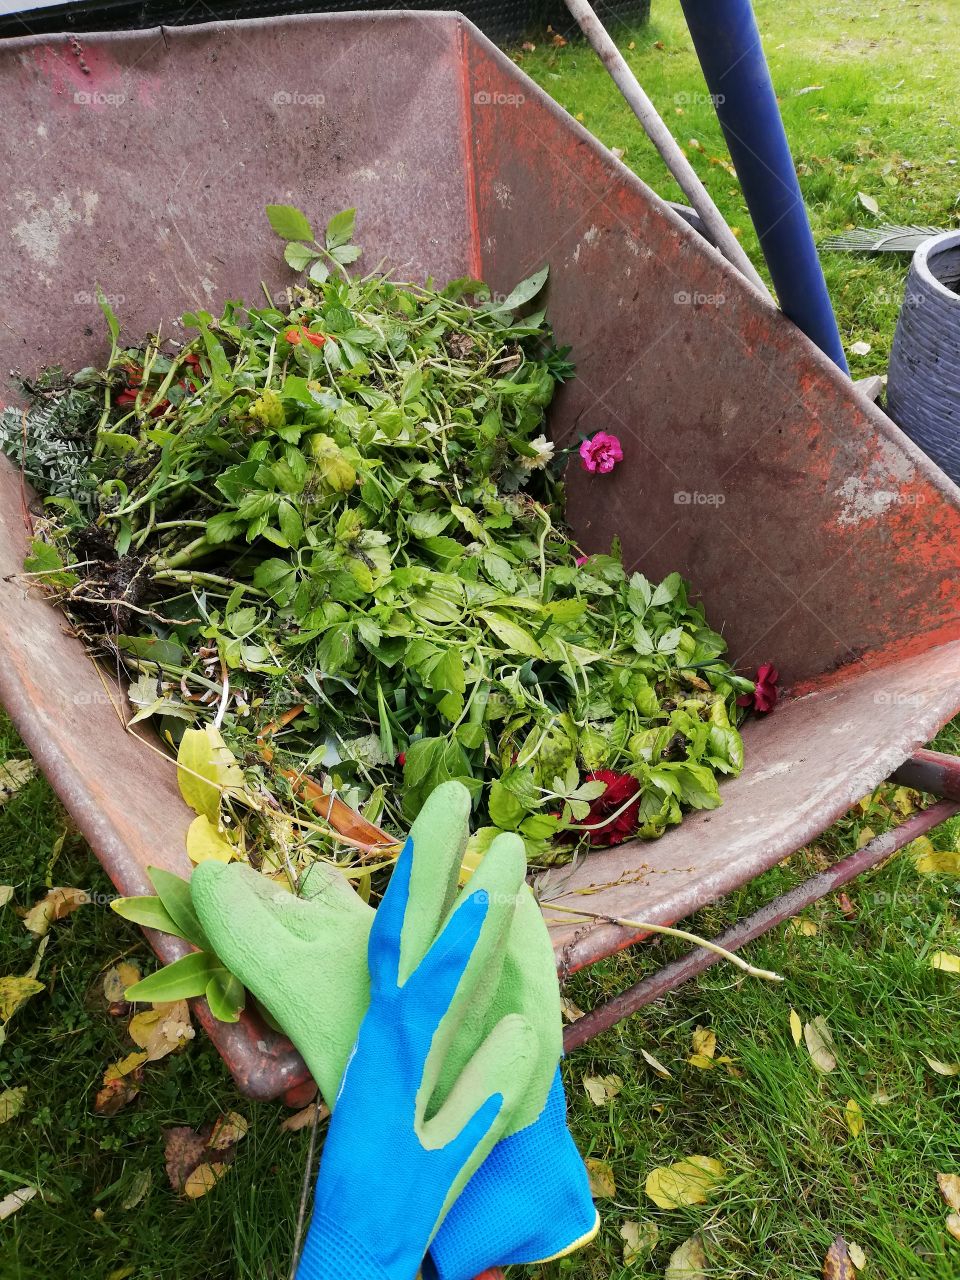 A red rusty wheelbarrow on the grass among fallen leaves. In the container different plants and red flowers to be composted. Blue green gloves on the handle, a spade leaning, a flower pot and a rake aback.